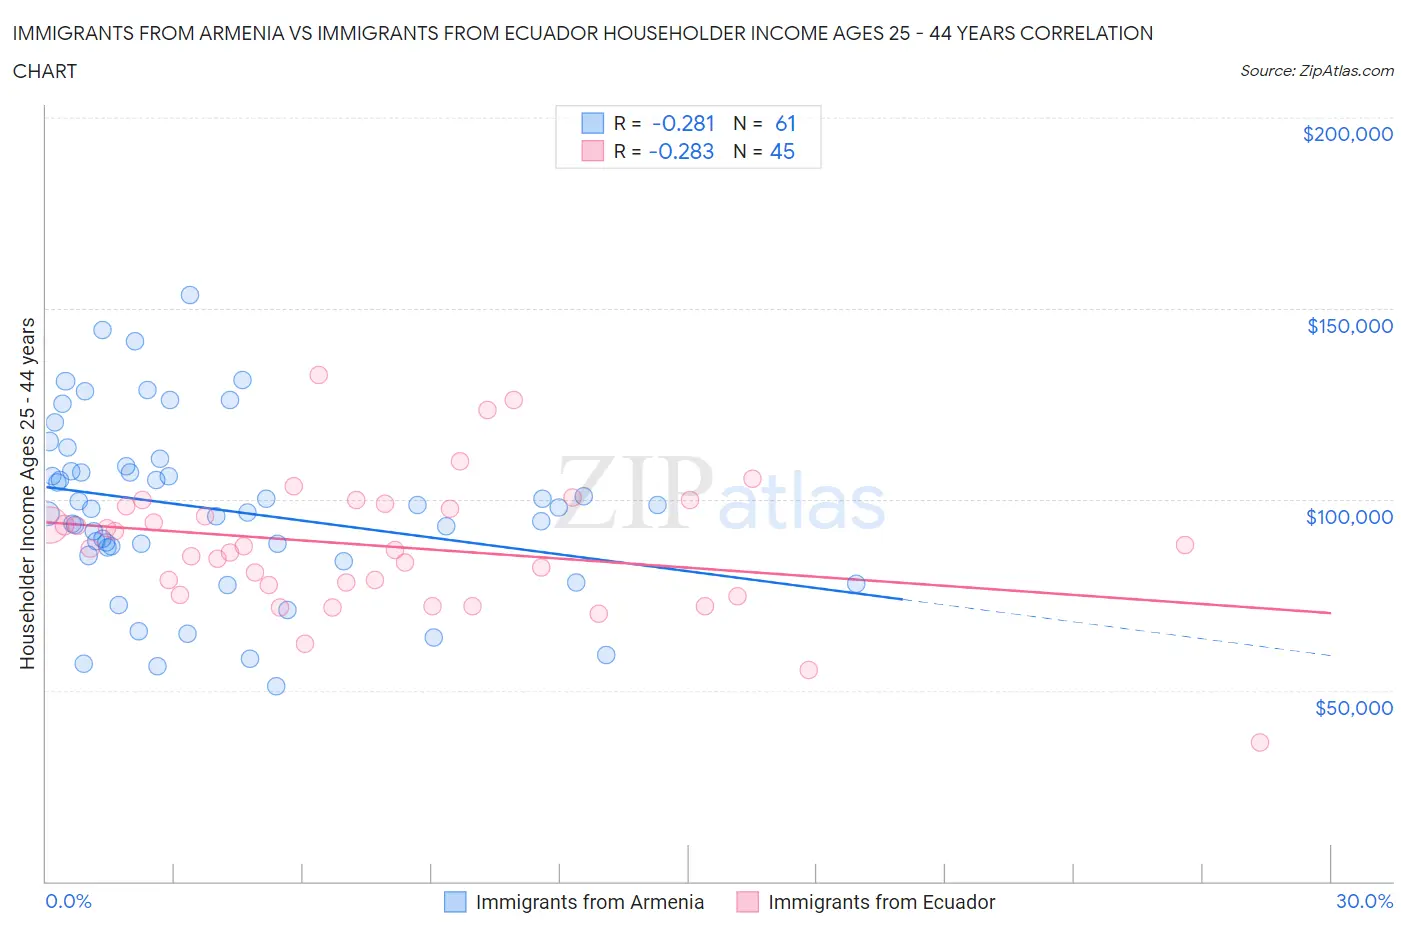 Immigrants from Armenia vs Immigrants from Ecuador Householder Income Ages 25 - 44 years